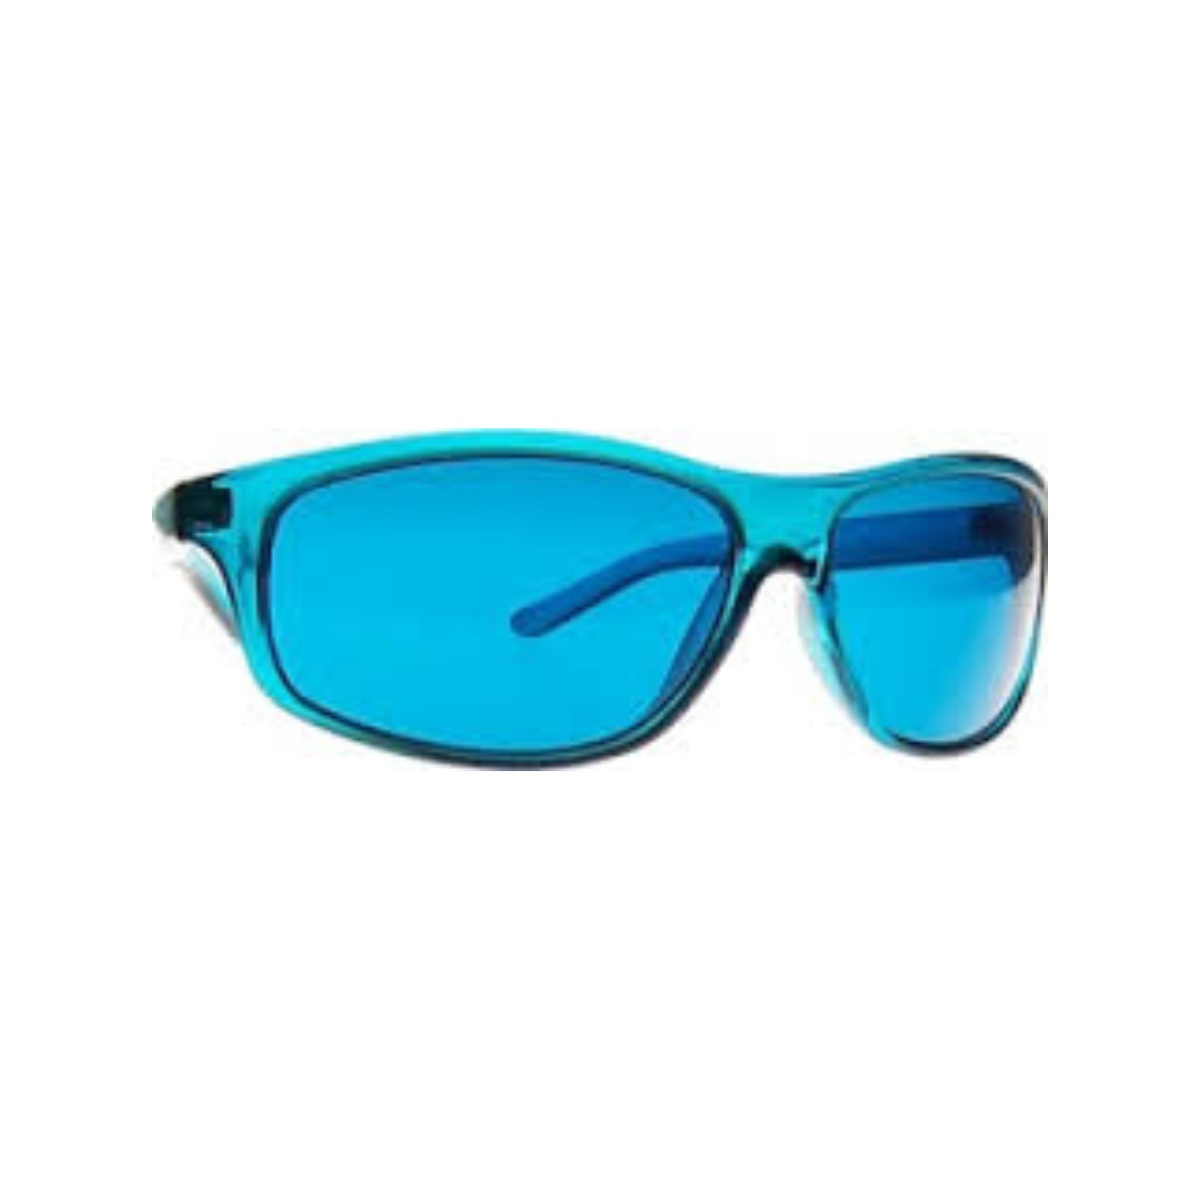 Colour Energy Therapy Glasses- Turquoise